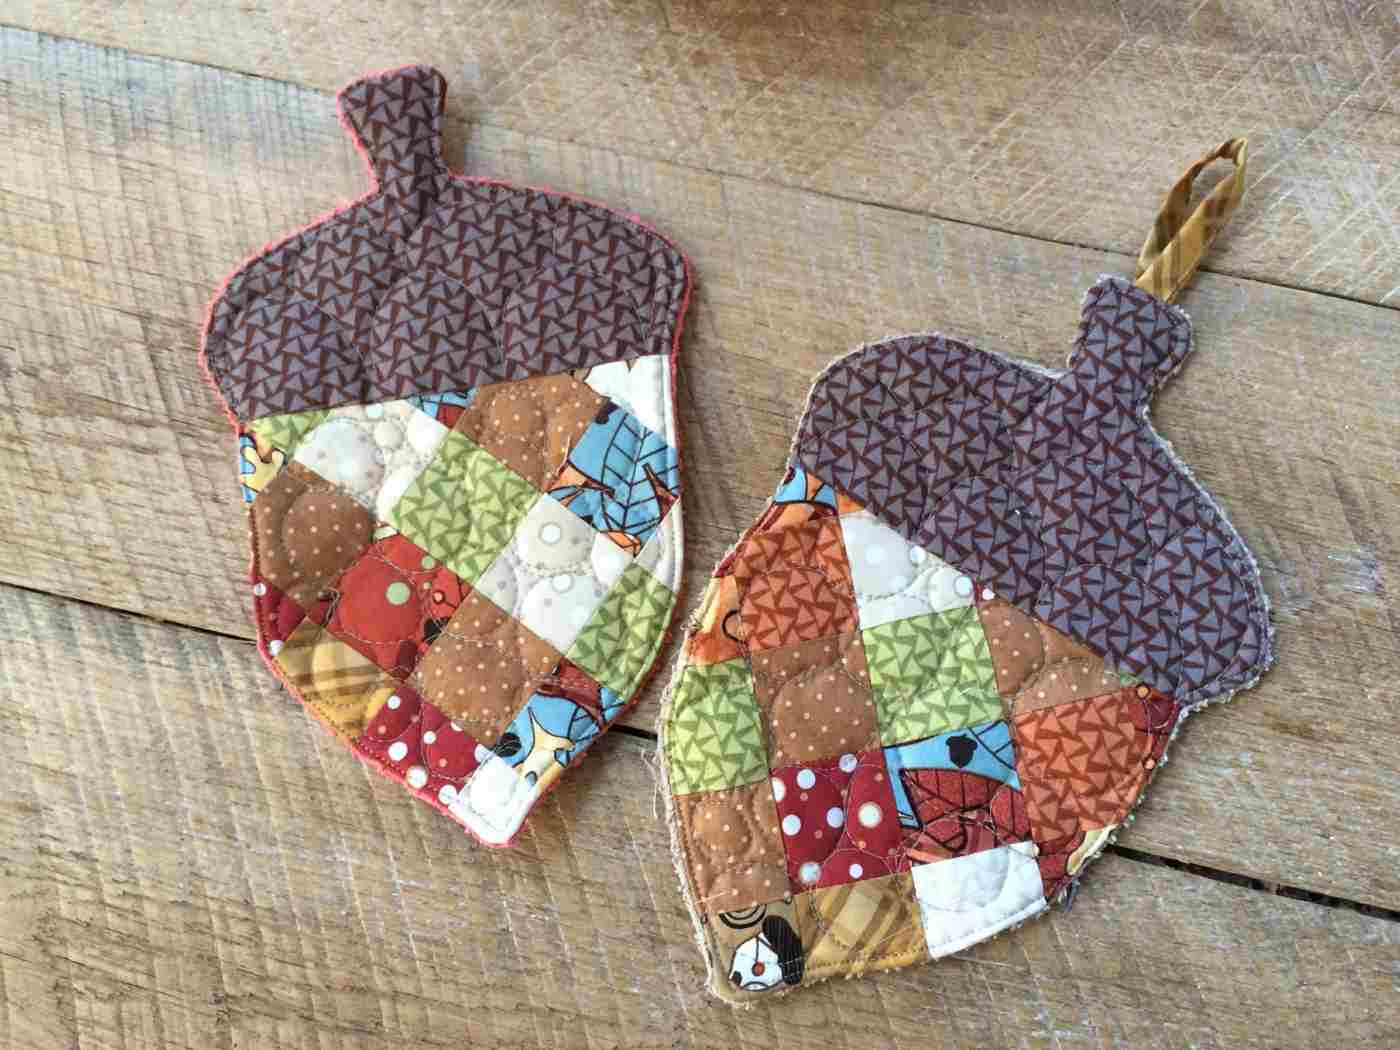 Autumn deco sewing from fabric debris and using as substitutes